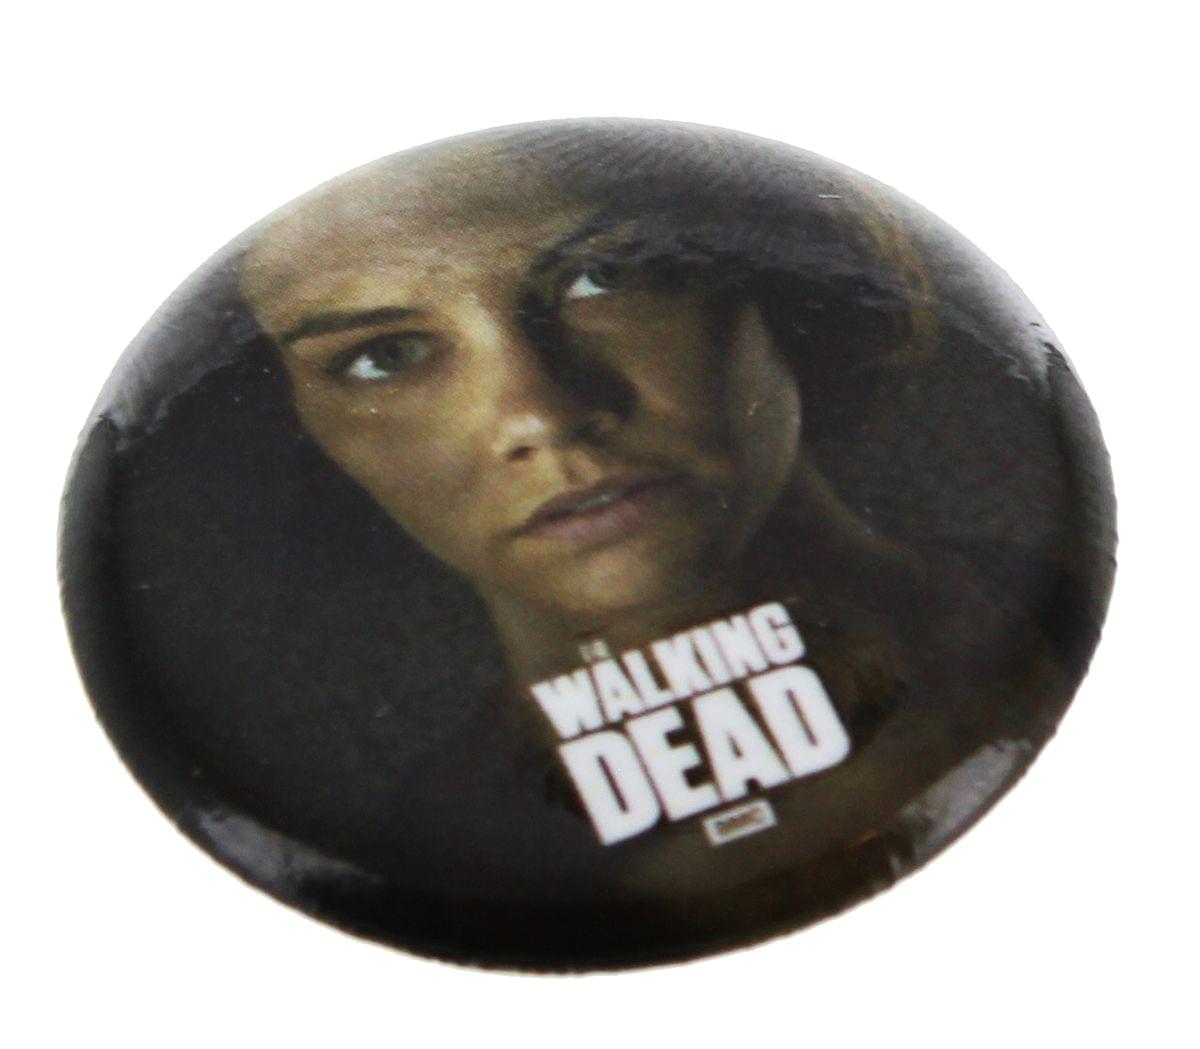 Walking Dead Maggie Collectible Pinback Button